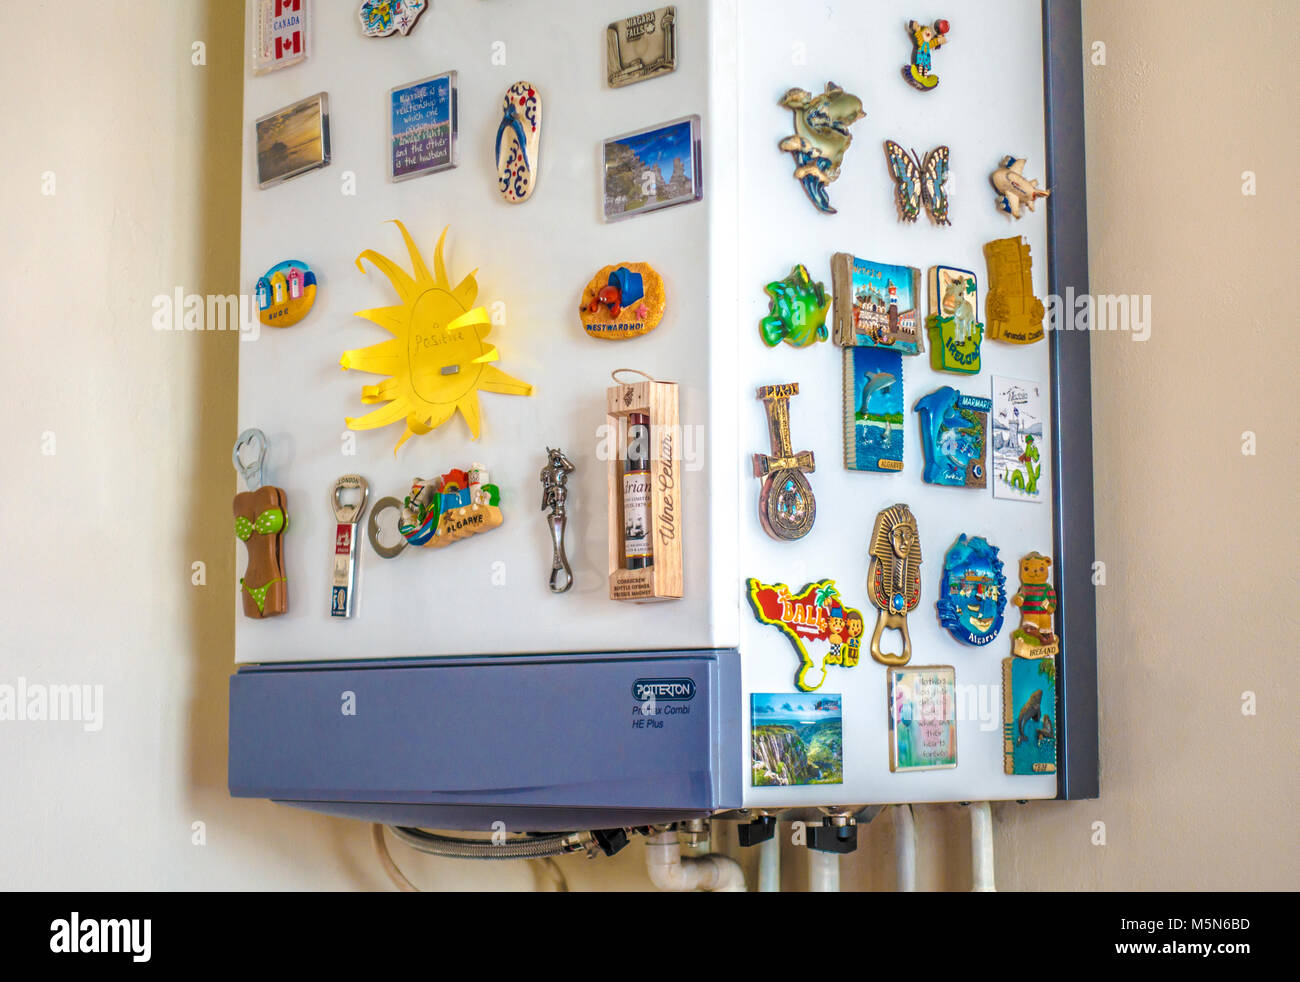 A domestic home gas boiler, for central heating and hot water, wall hung in a room corner, covered in magnetic souvenirs and mementos. England, UK. Stock Photo